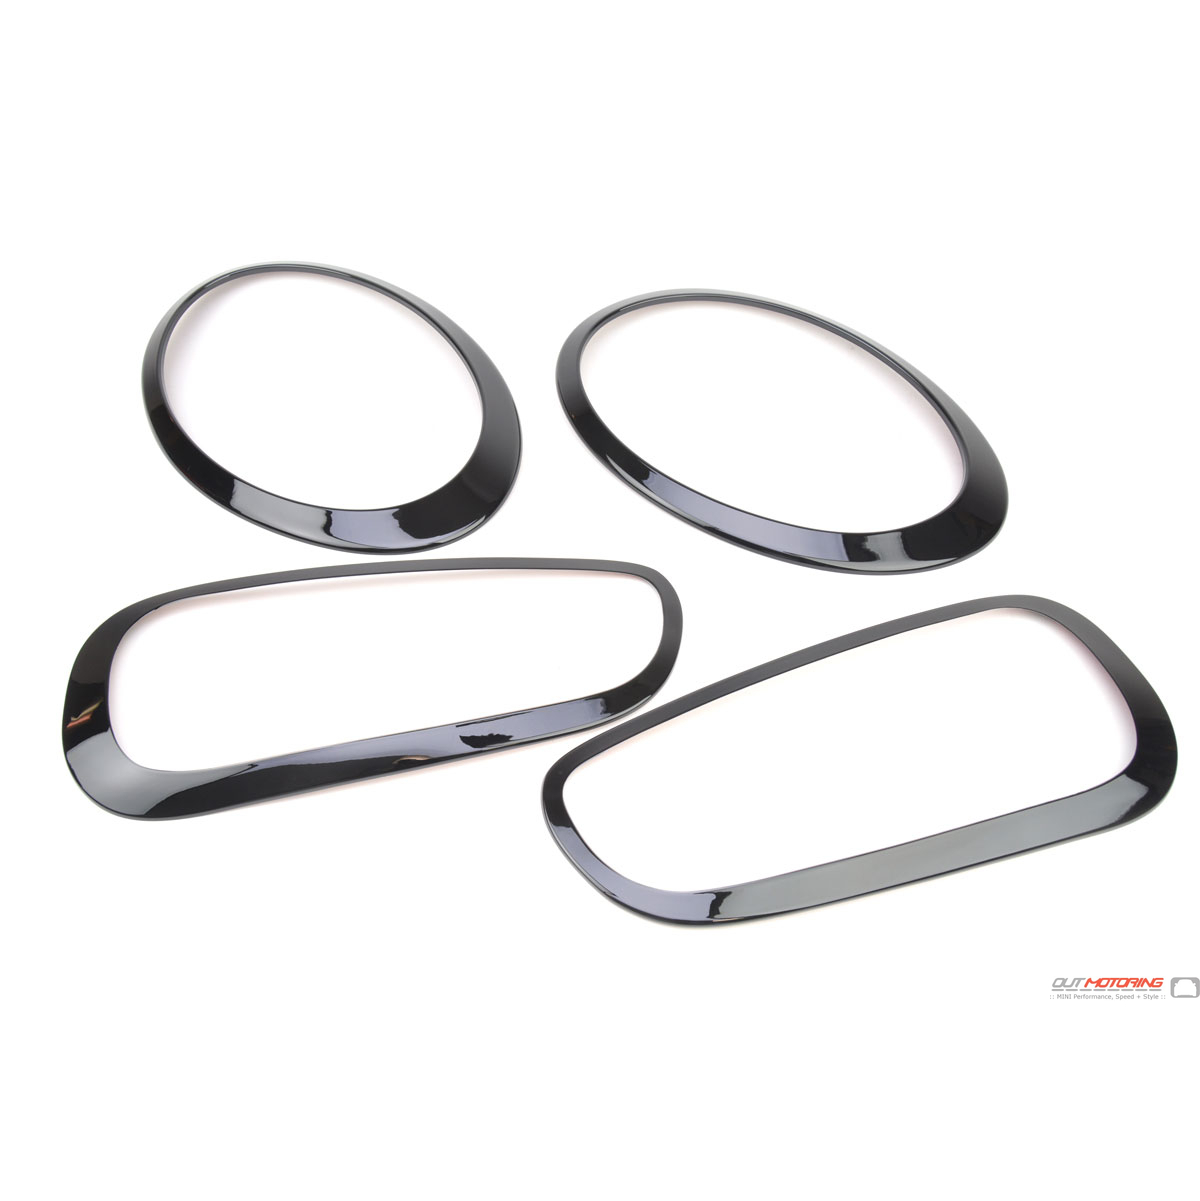 F54 Clubman,05 Headlight Head lamp and Taillight Rear Light Trunk Lid Lamp Frame Cover Cap Trim for Mini Cooper MTK31 